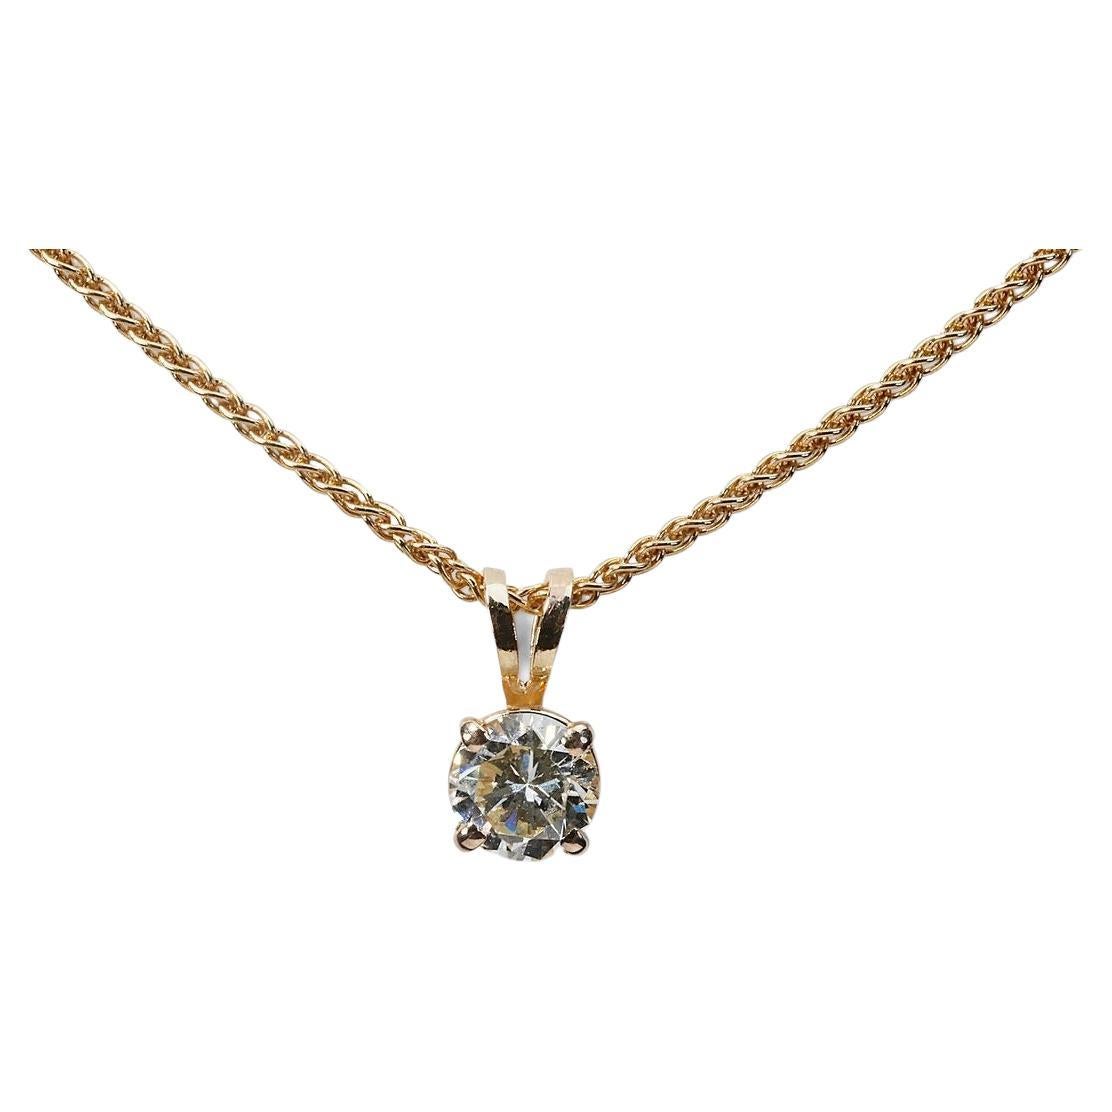 Stunning 18k Yellow Gold Solitaire Necklace w/ 0.9ct Natural Diamond GIA Cert